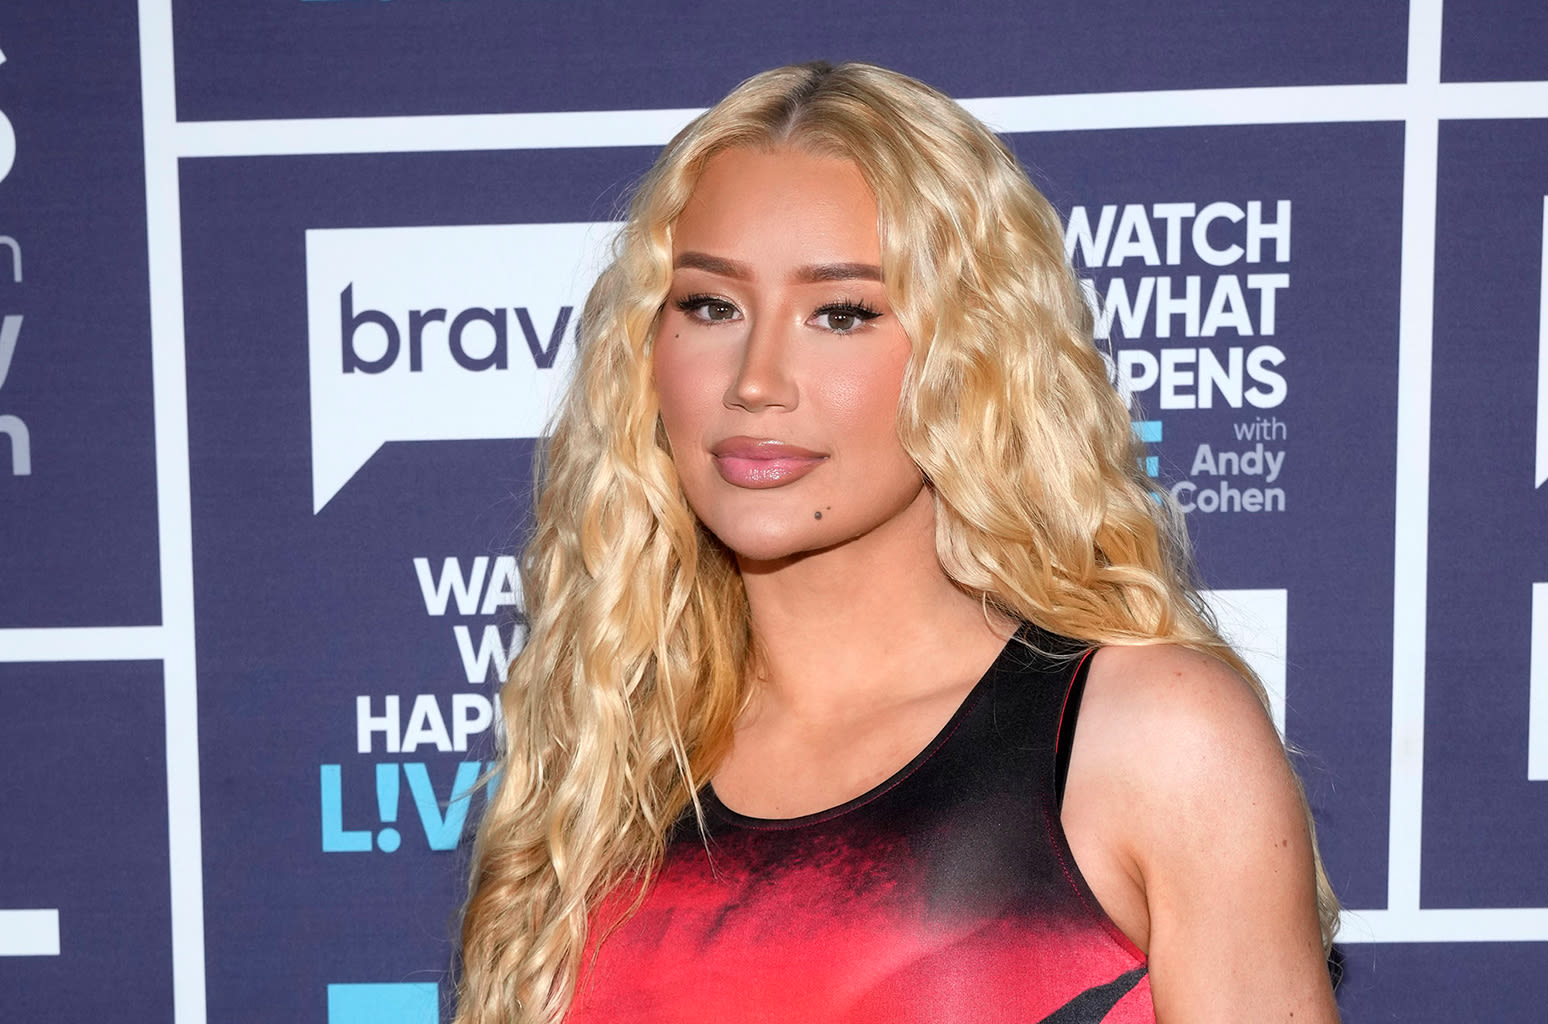 Iggy Azalea Says She’s ‘Very Much the Only Parent’ to Her Son With Playboi Carti